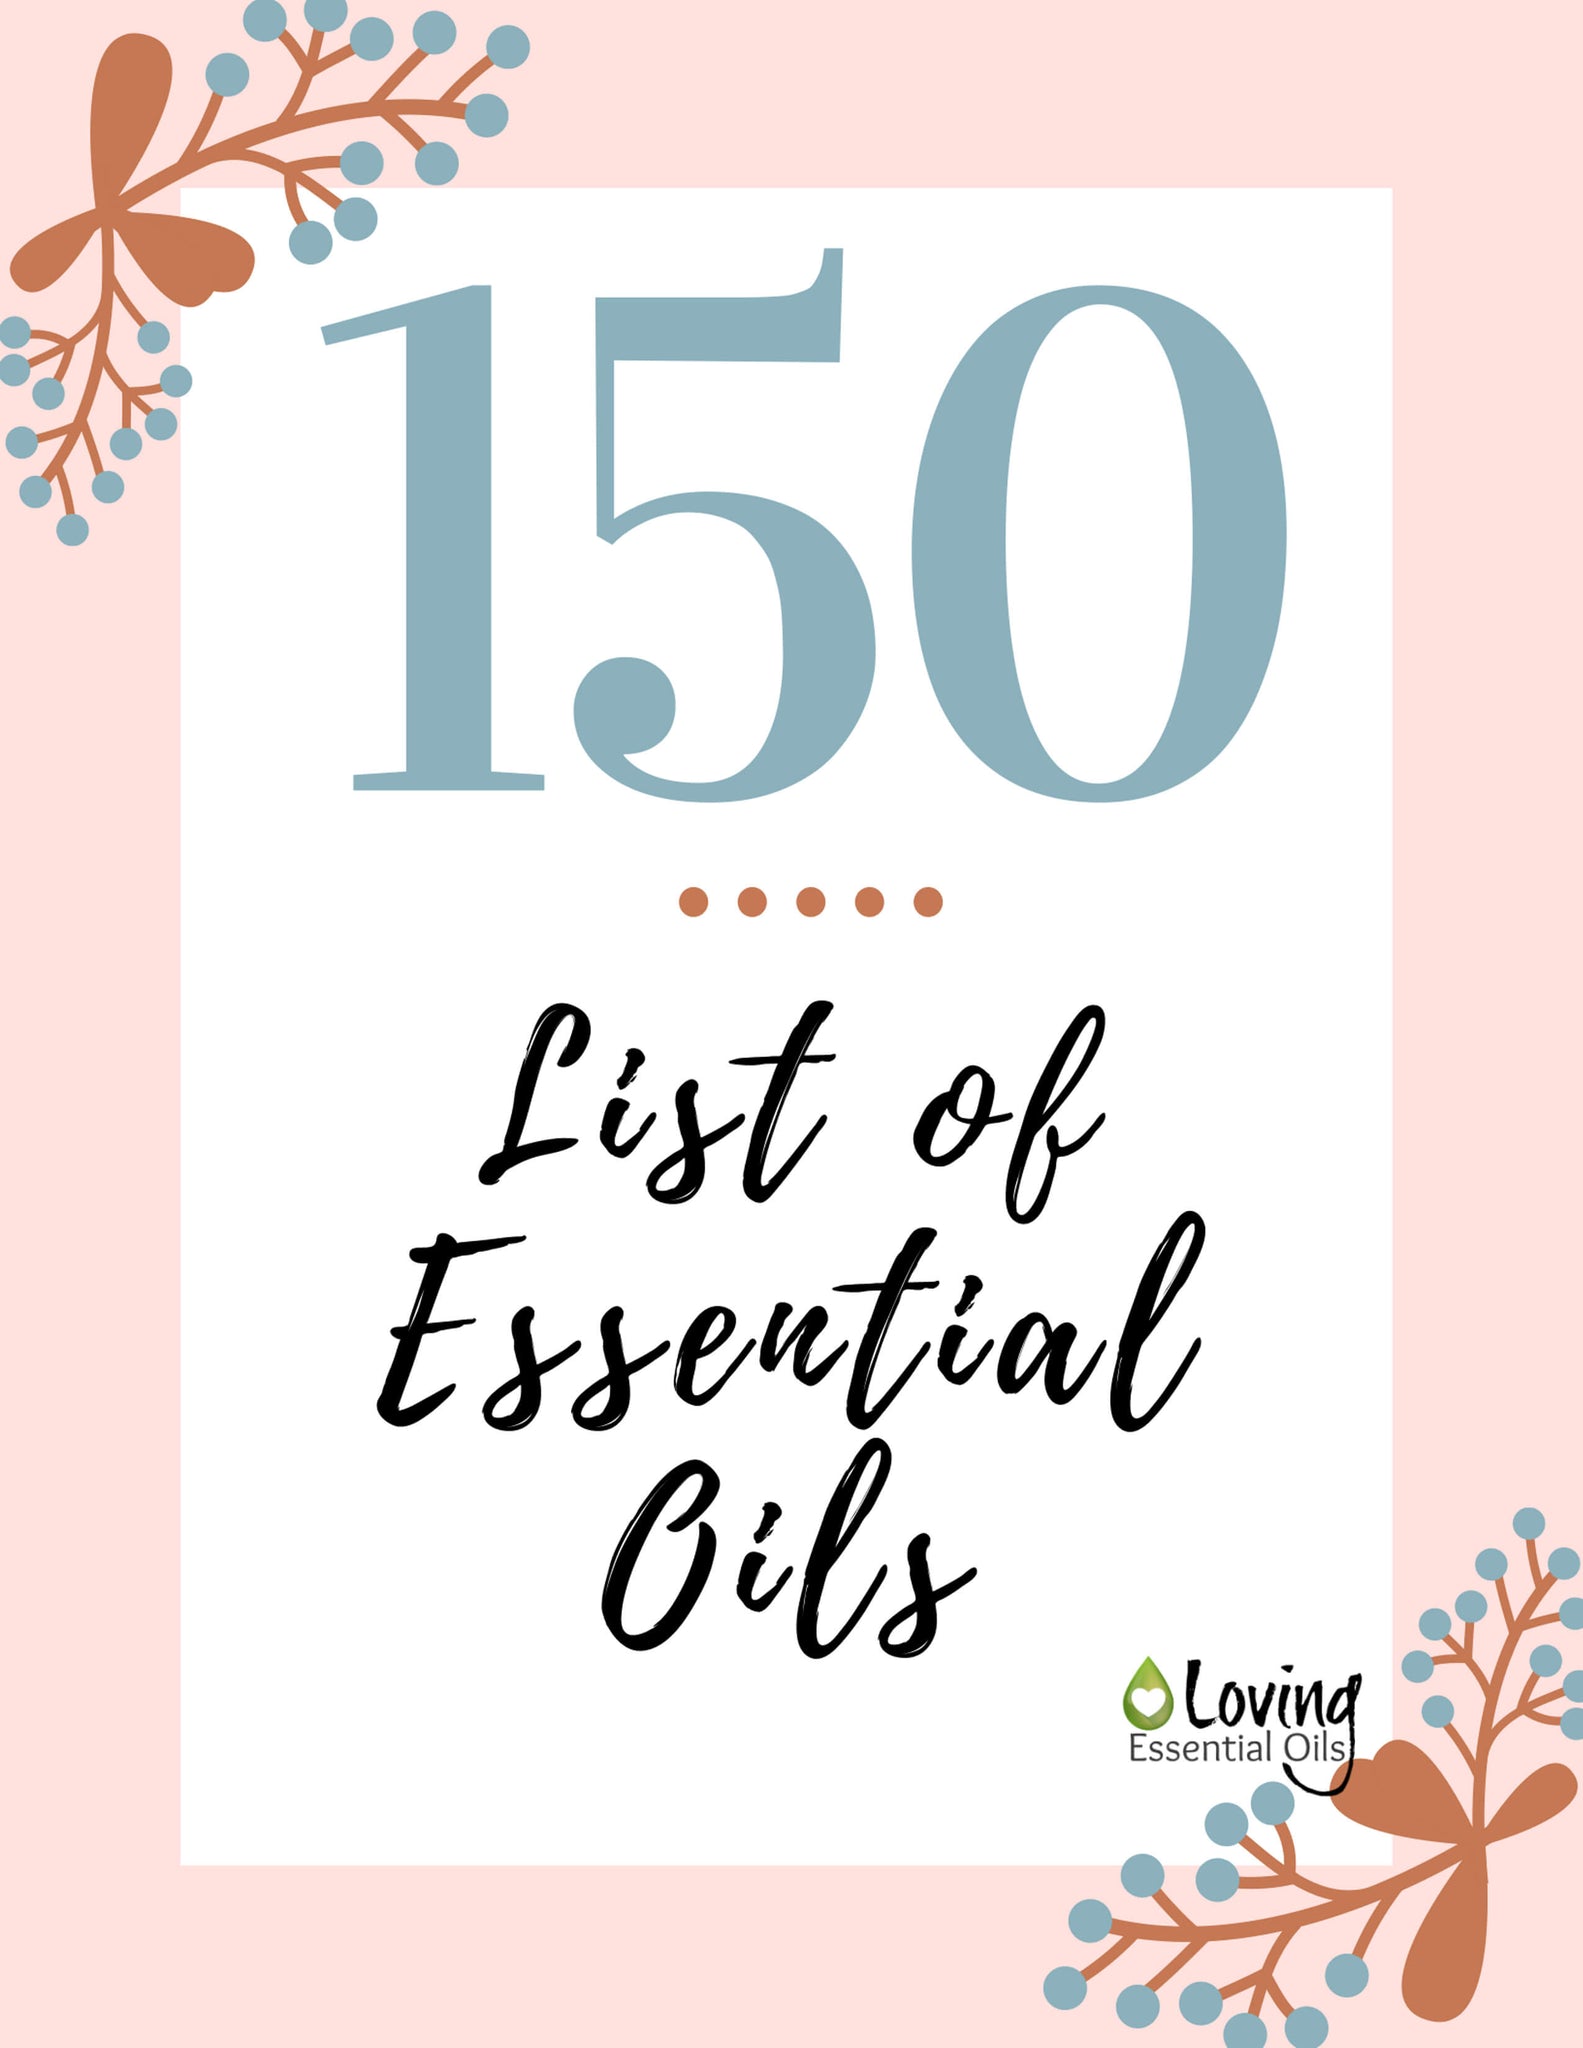 130 Essential Oils: Essential Oil Uses and Benefits